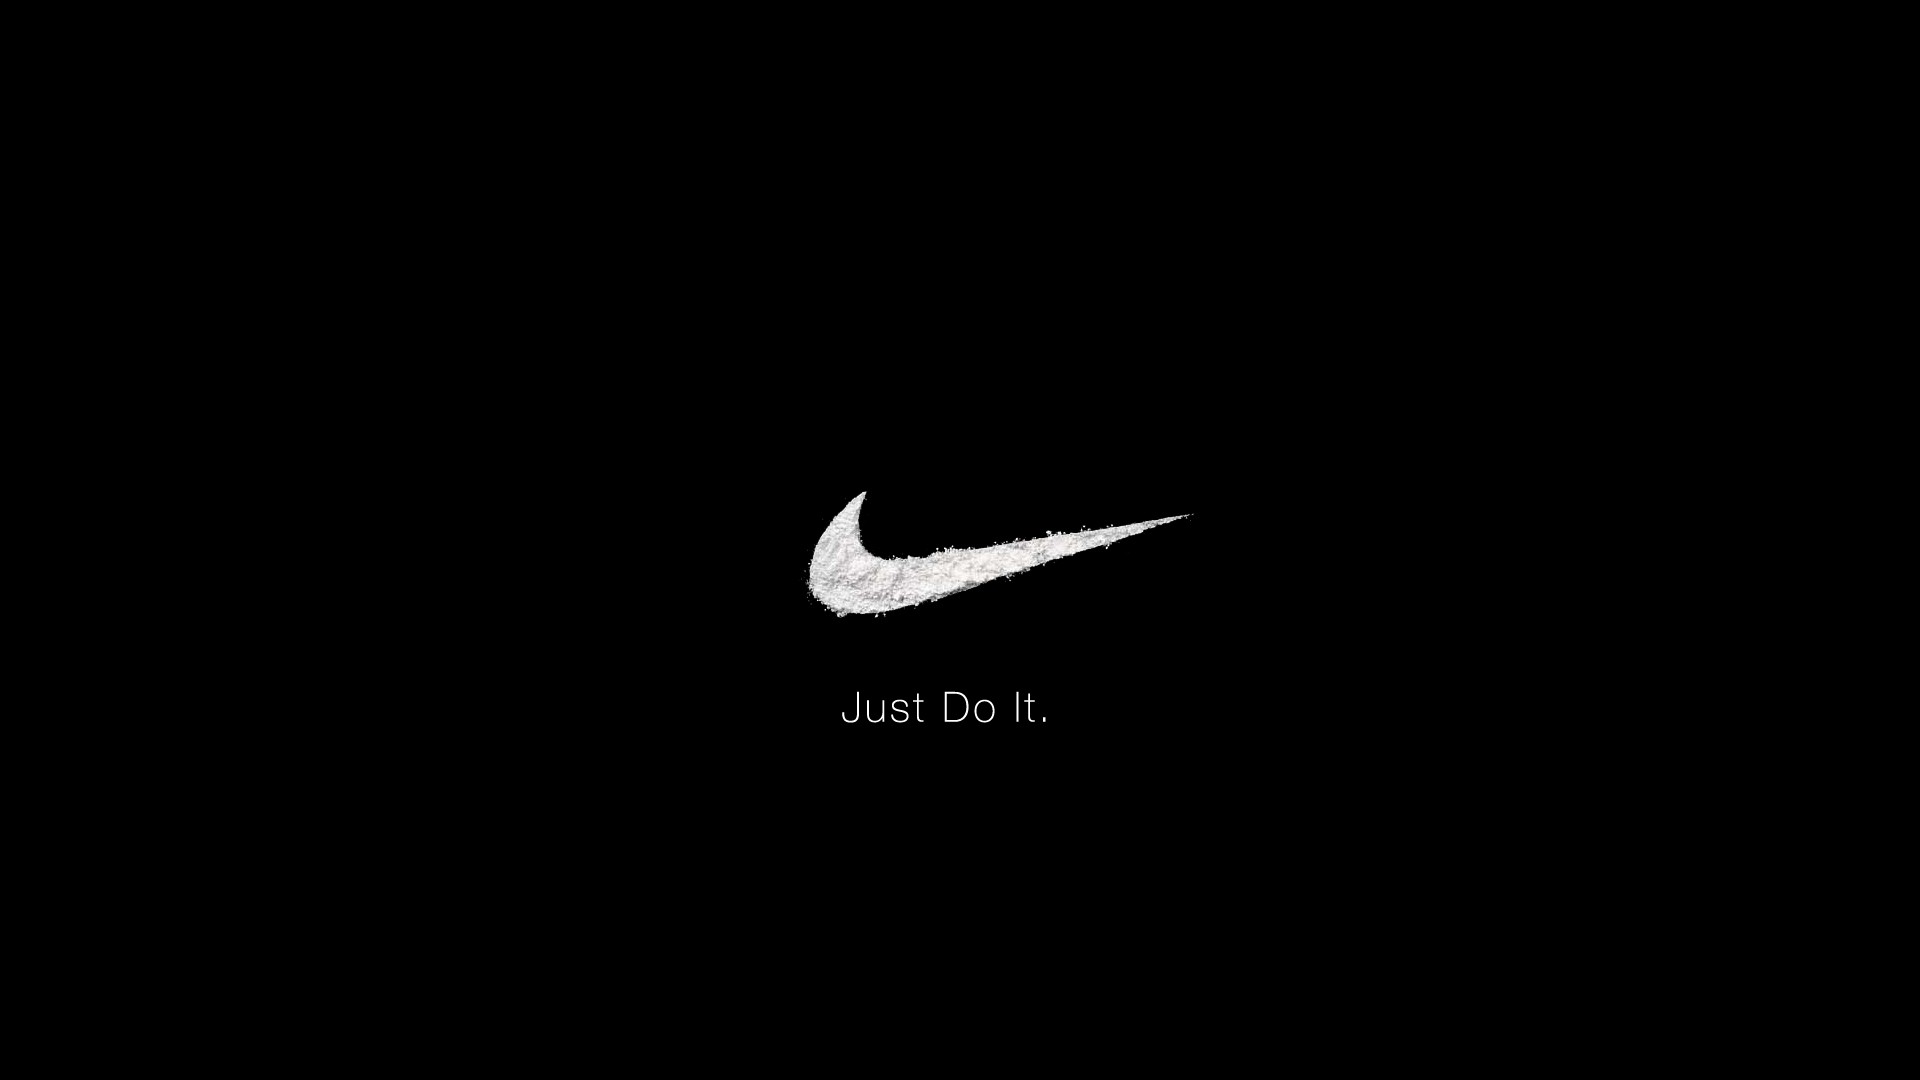 Cool Nike Logos Just Do It Justice Slogan